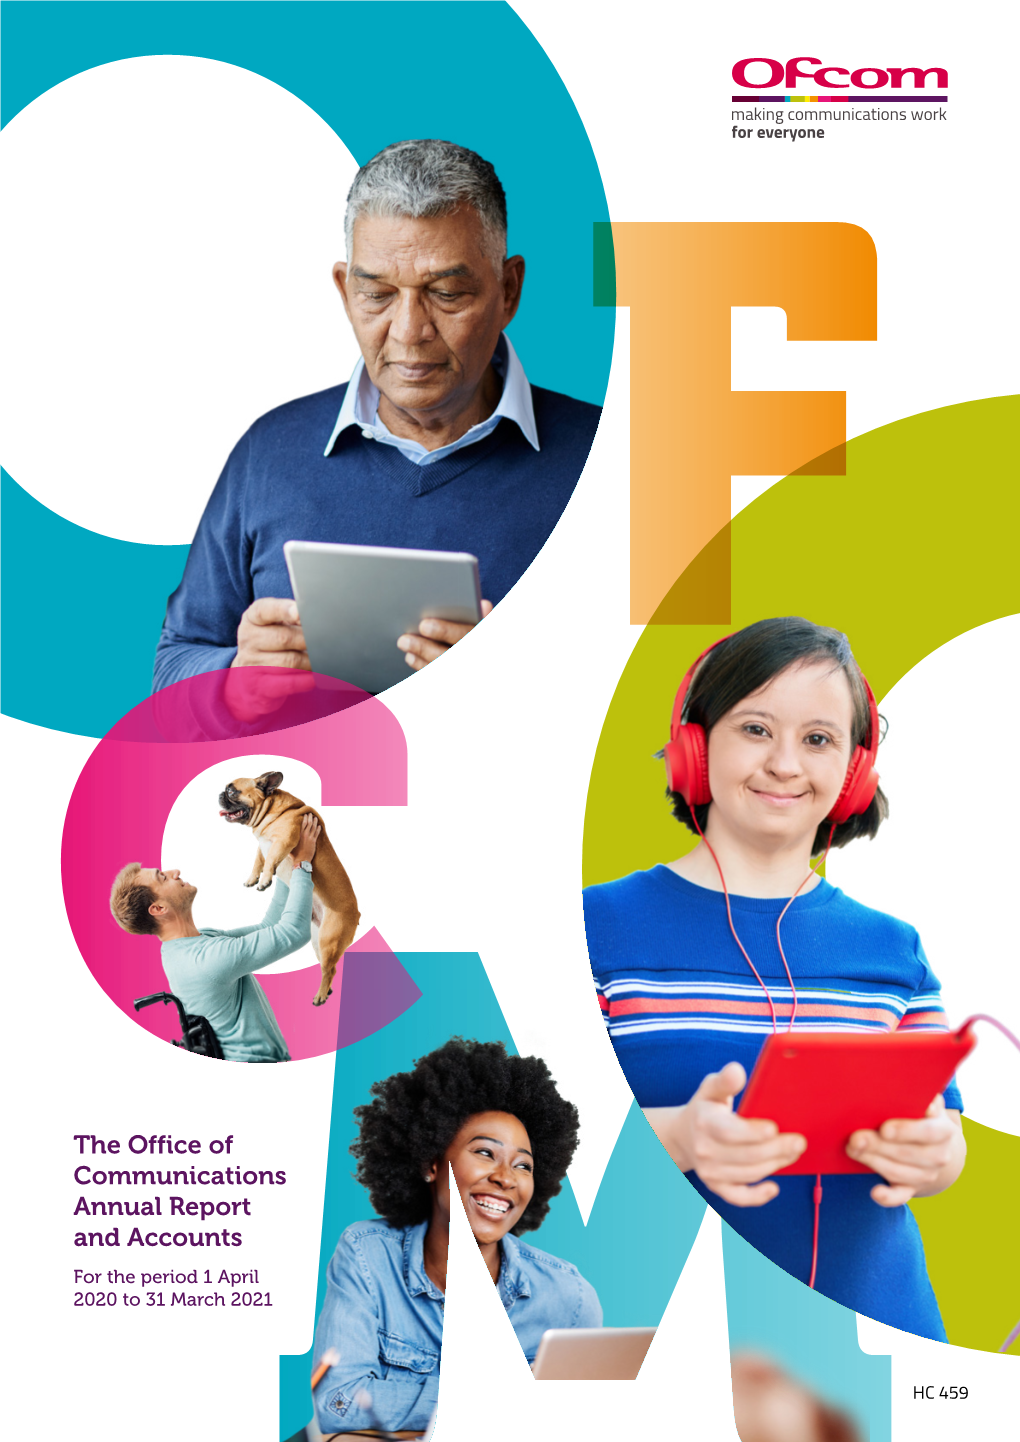 Ofcom Annual Report and Accounts 2020-21